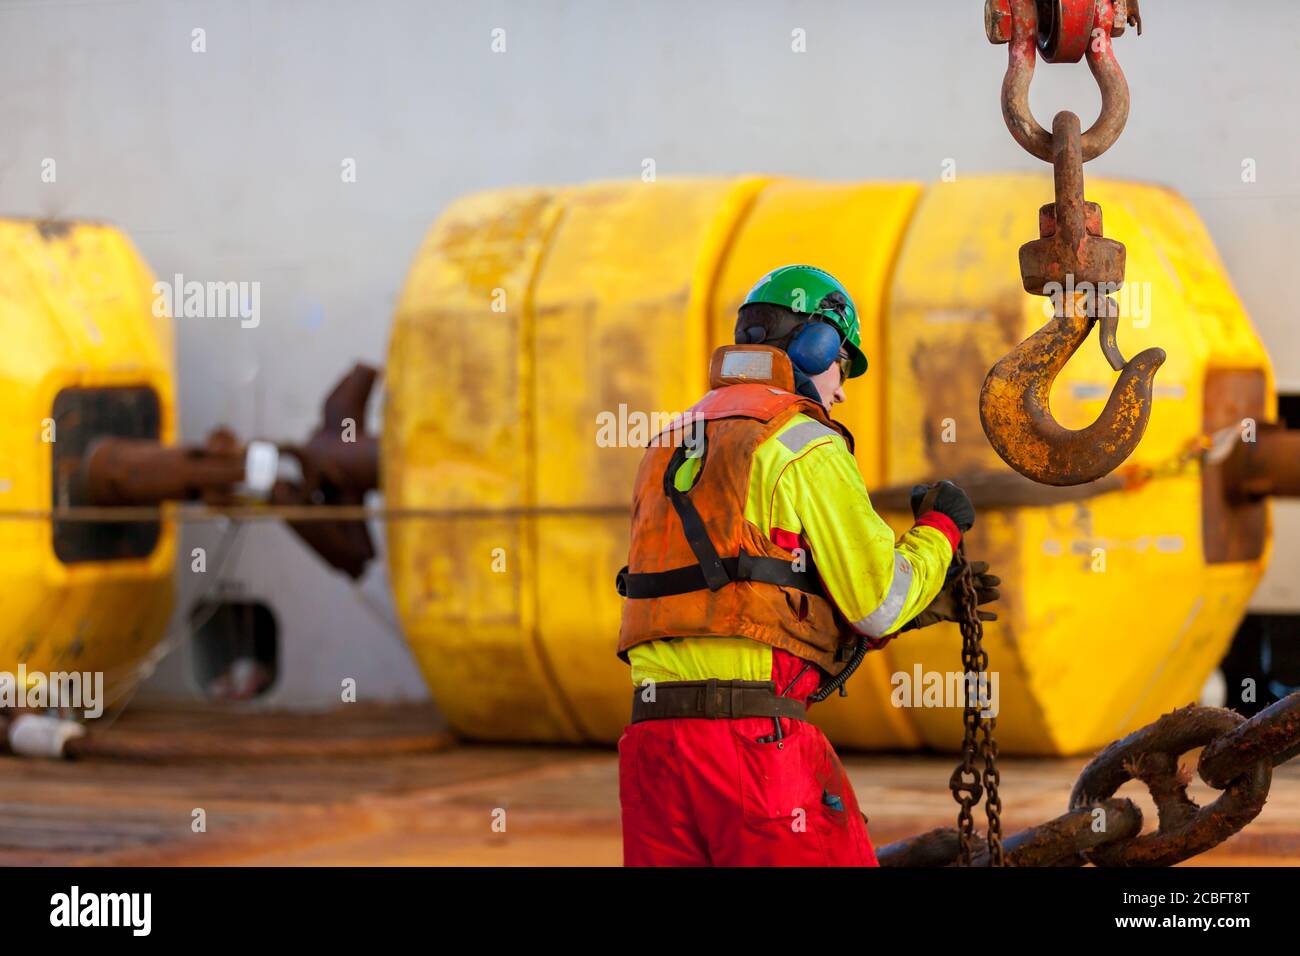 NORTH SEA, NORWAY - 2015 JANUARY 19. Able body seaman working on deck under anchor handling operation Stock Photo